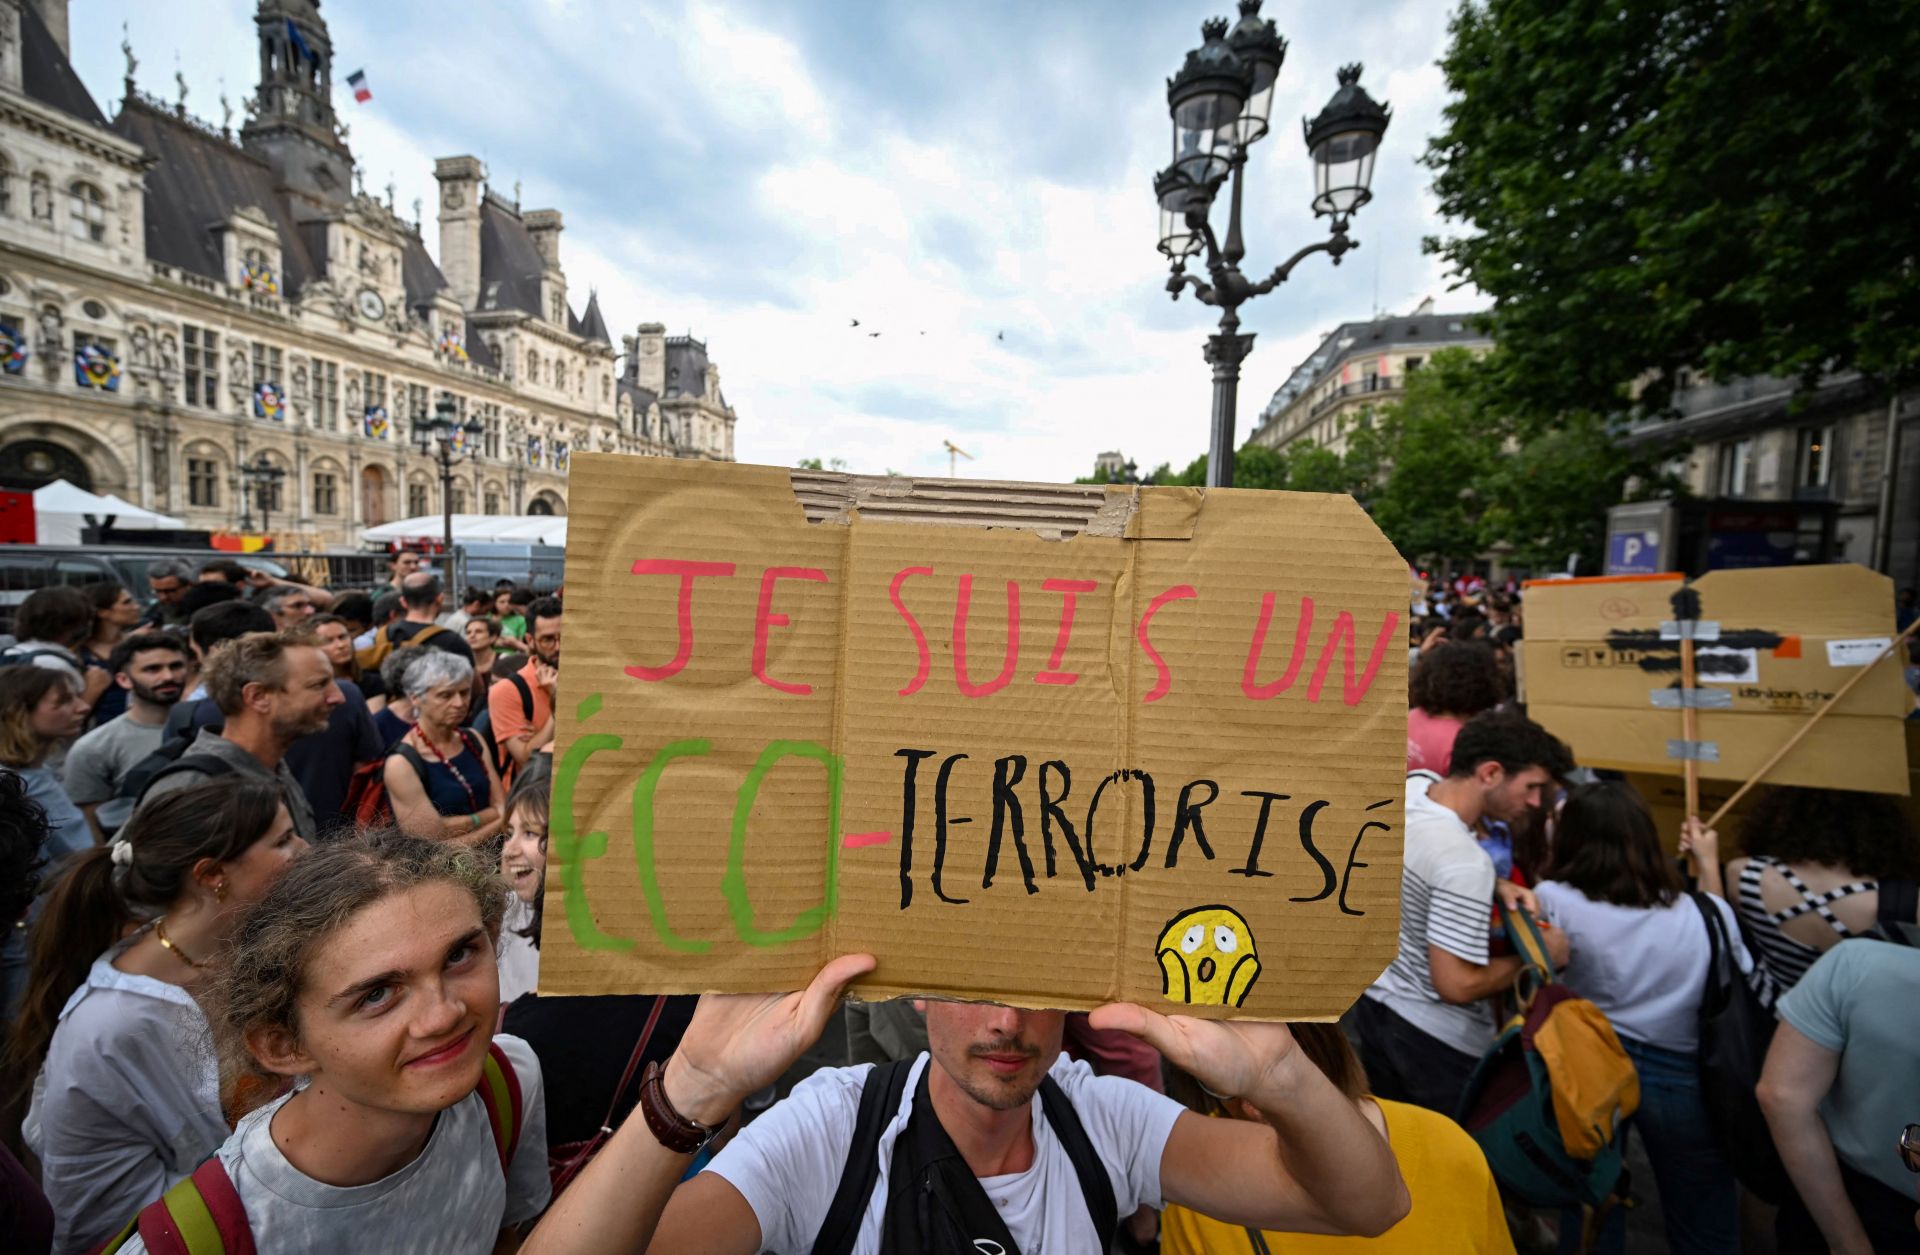 A protester holds a sign reading "I'm an eco-terrorised" during a rally to support the environmental movement Les Soulevements de la Terre (Uprisings of the Earth) near city hall in Paris, France, on June 21, 2023.